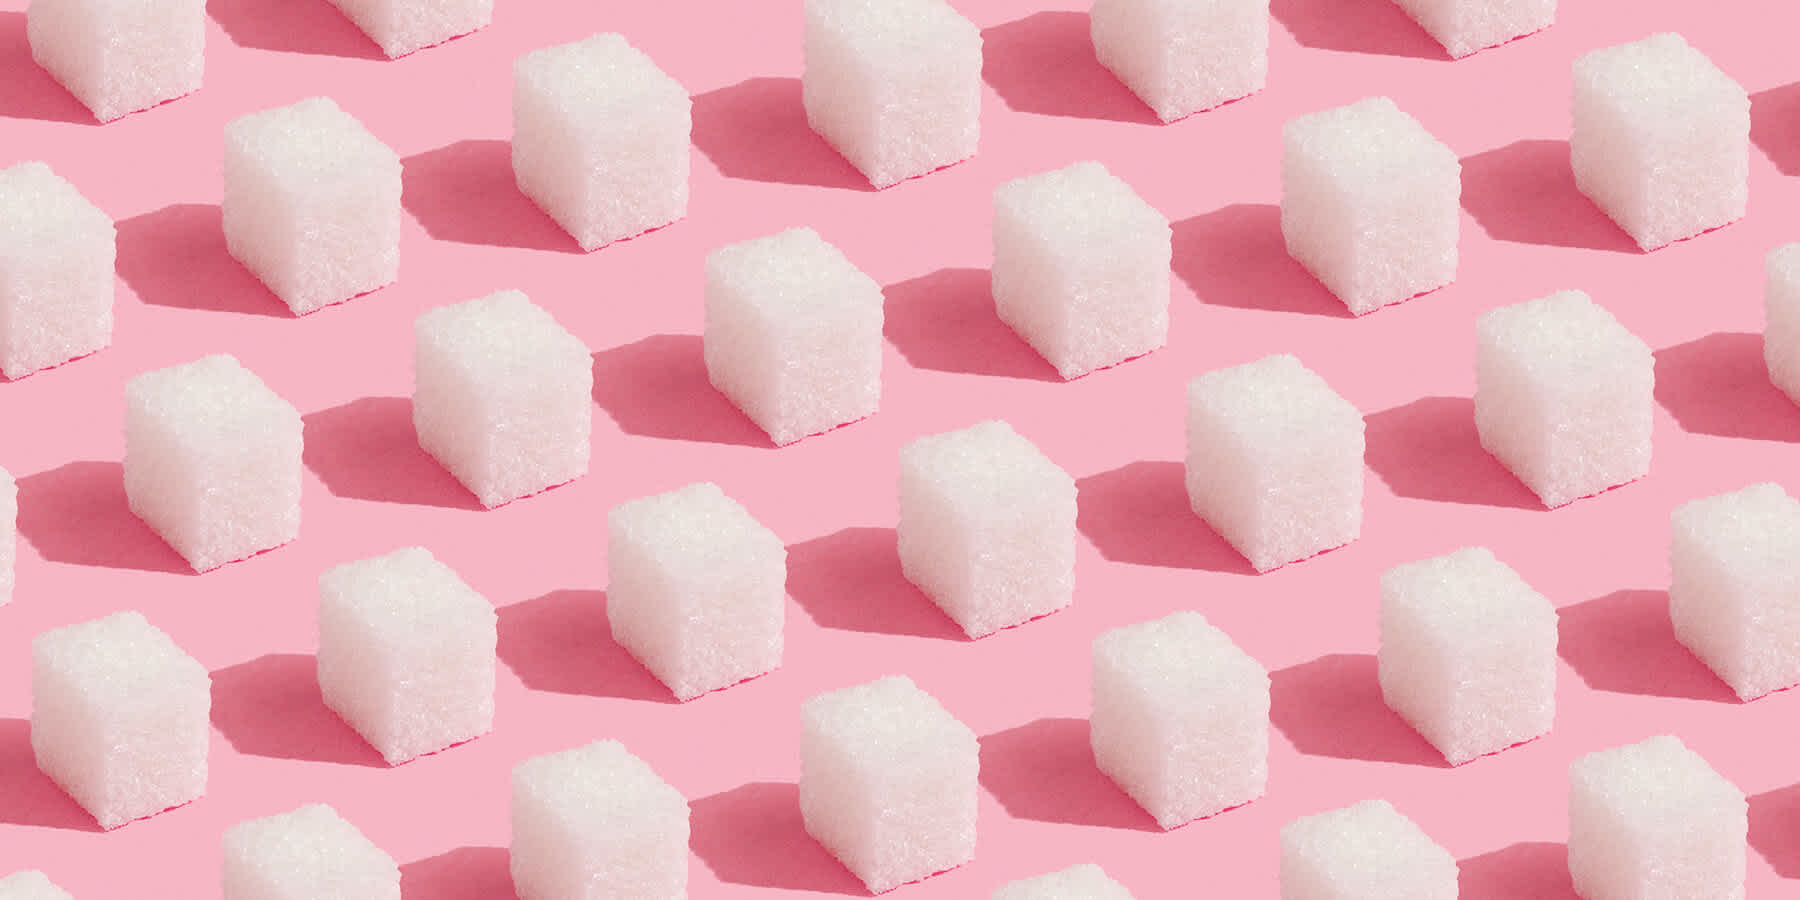 Cubes of sugar against a pink background to represent always craving sugar